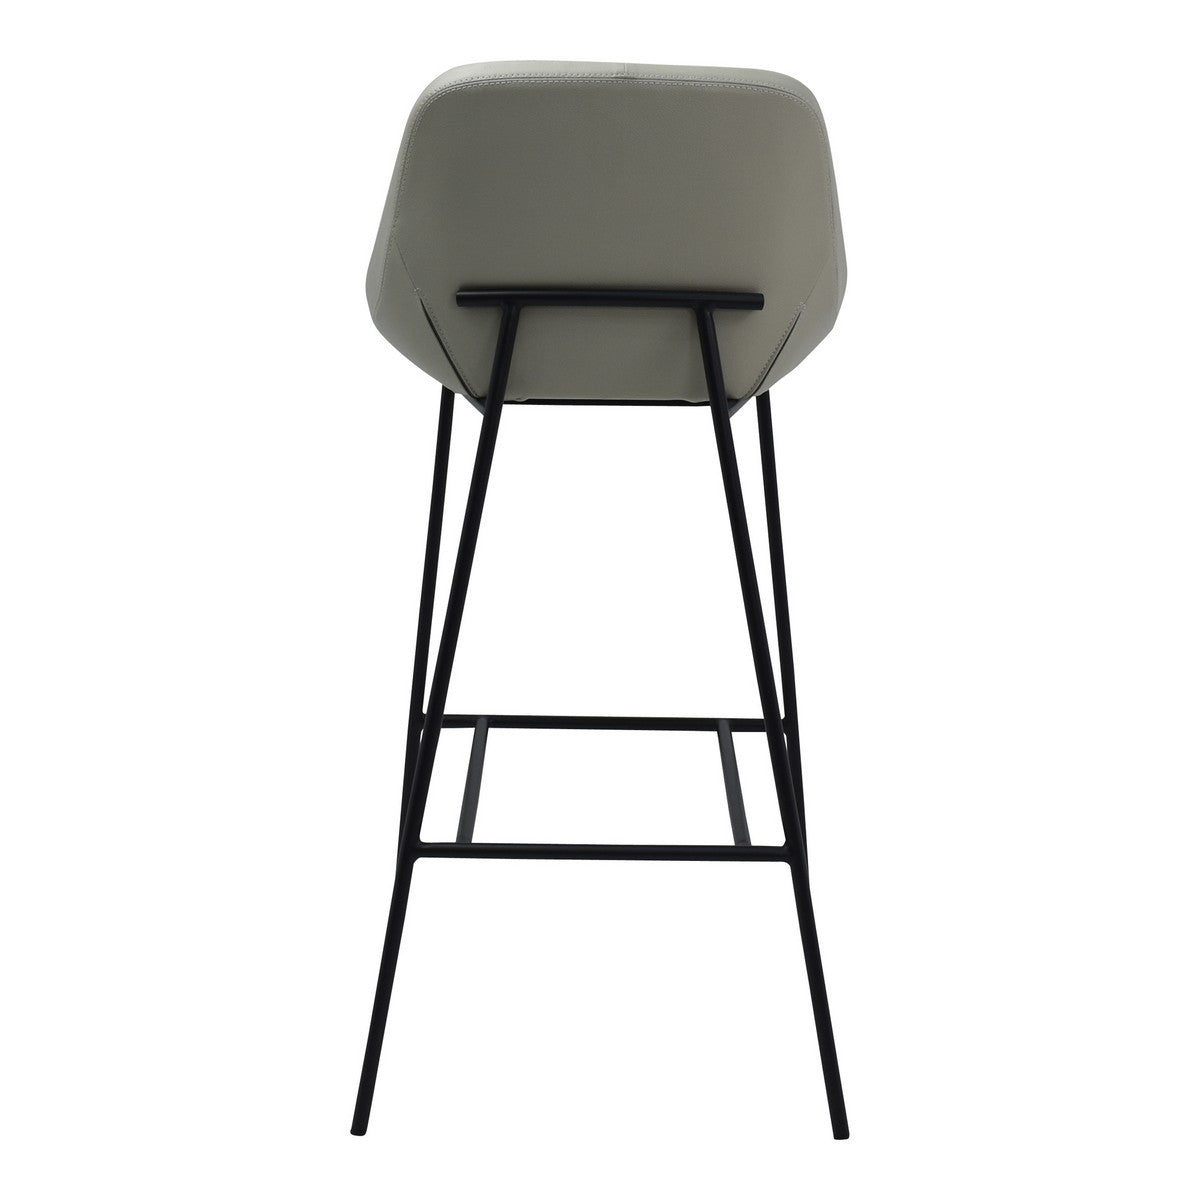 Moe's Home Collection Shelby Barstool Beige - EJ-1039-34